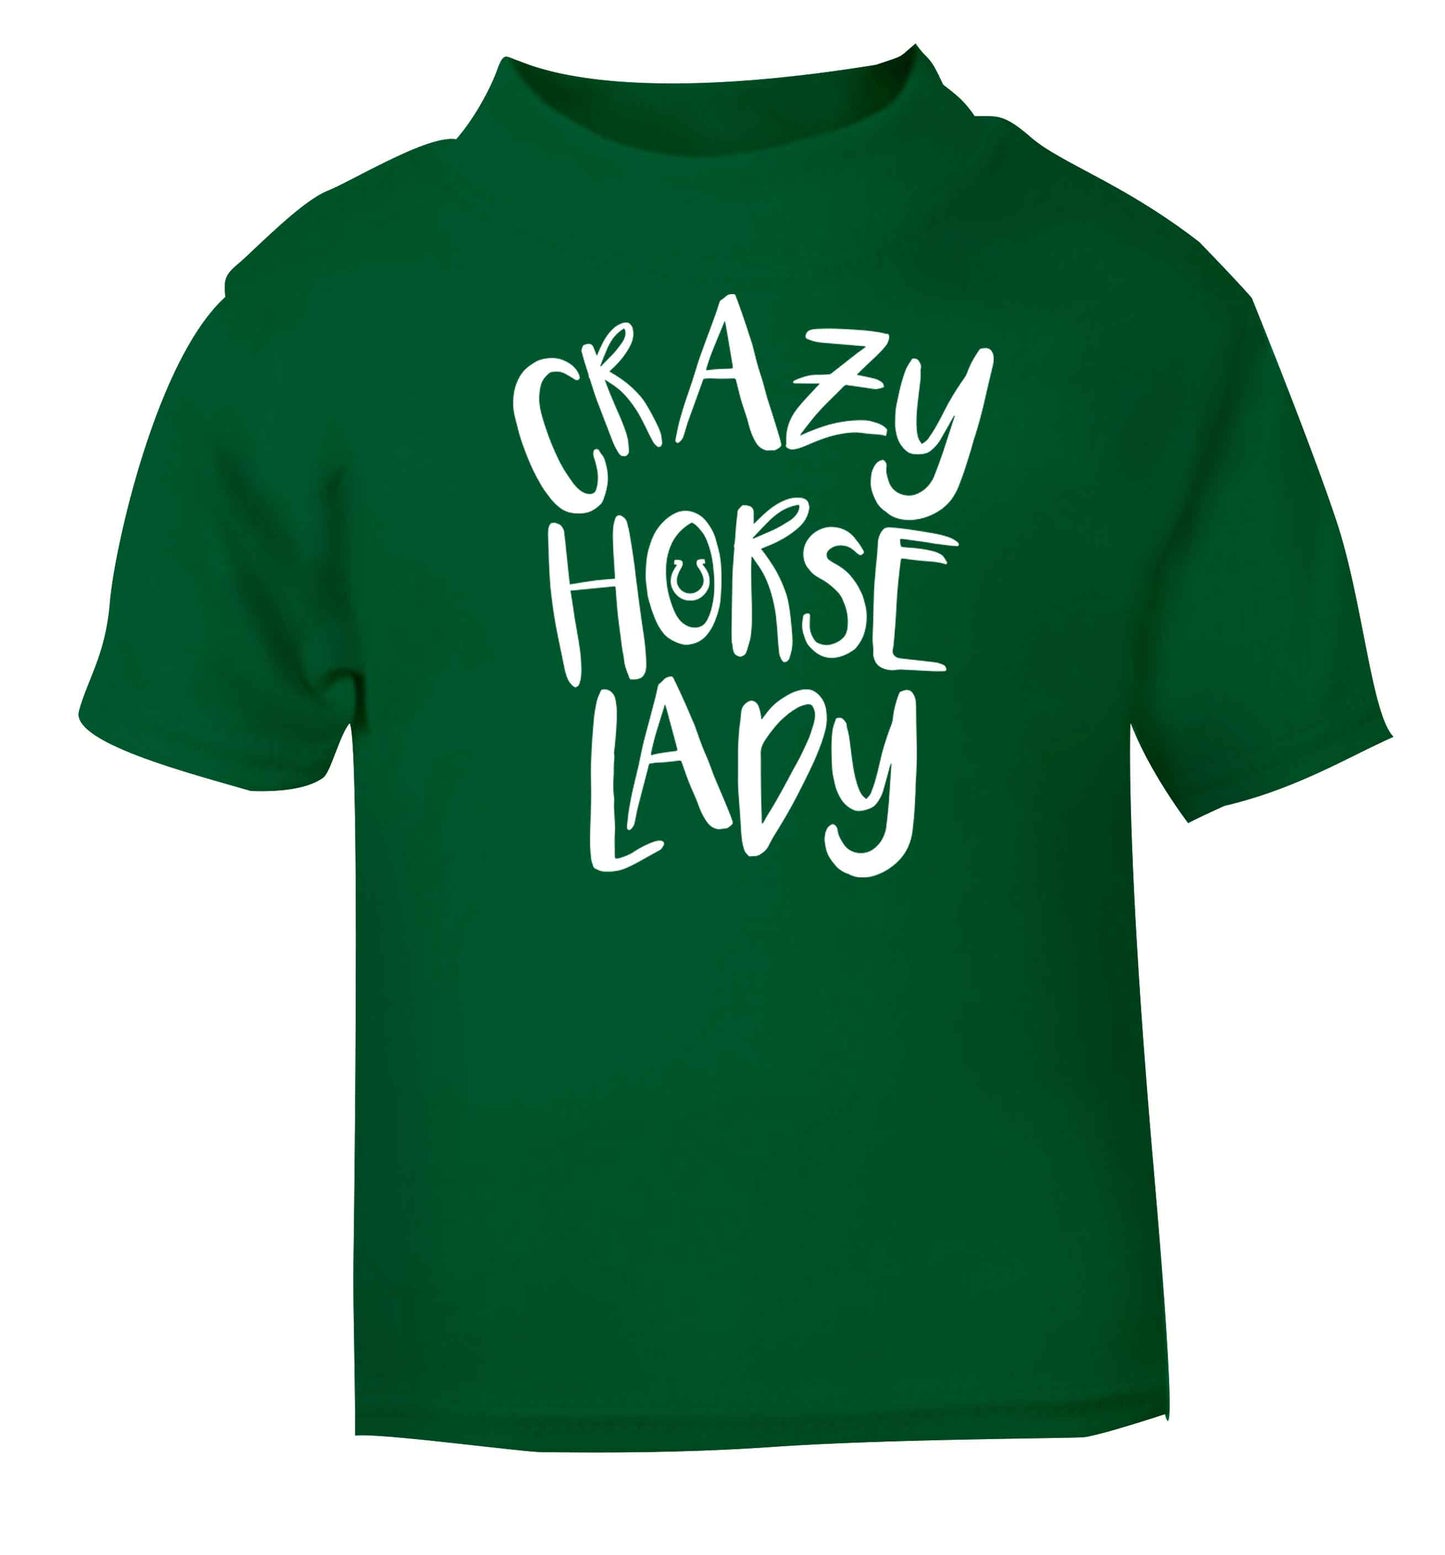 Crazy horse lady green baby toddler Tshirt 2 Years